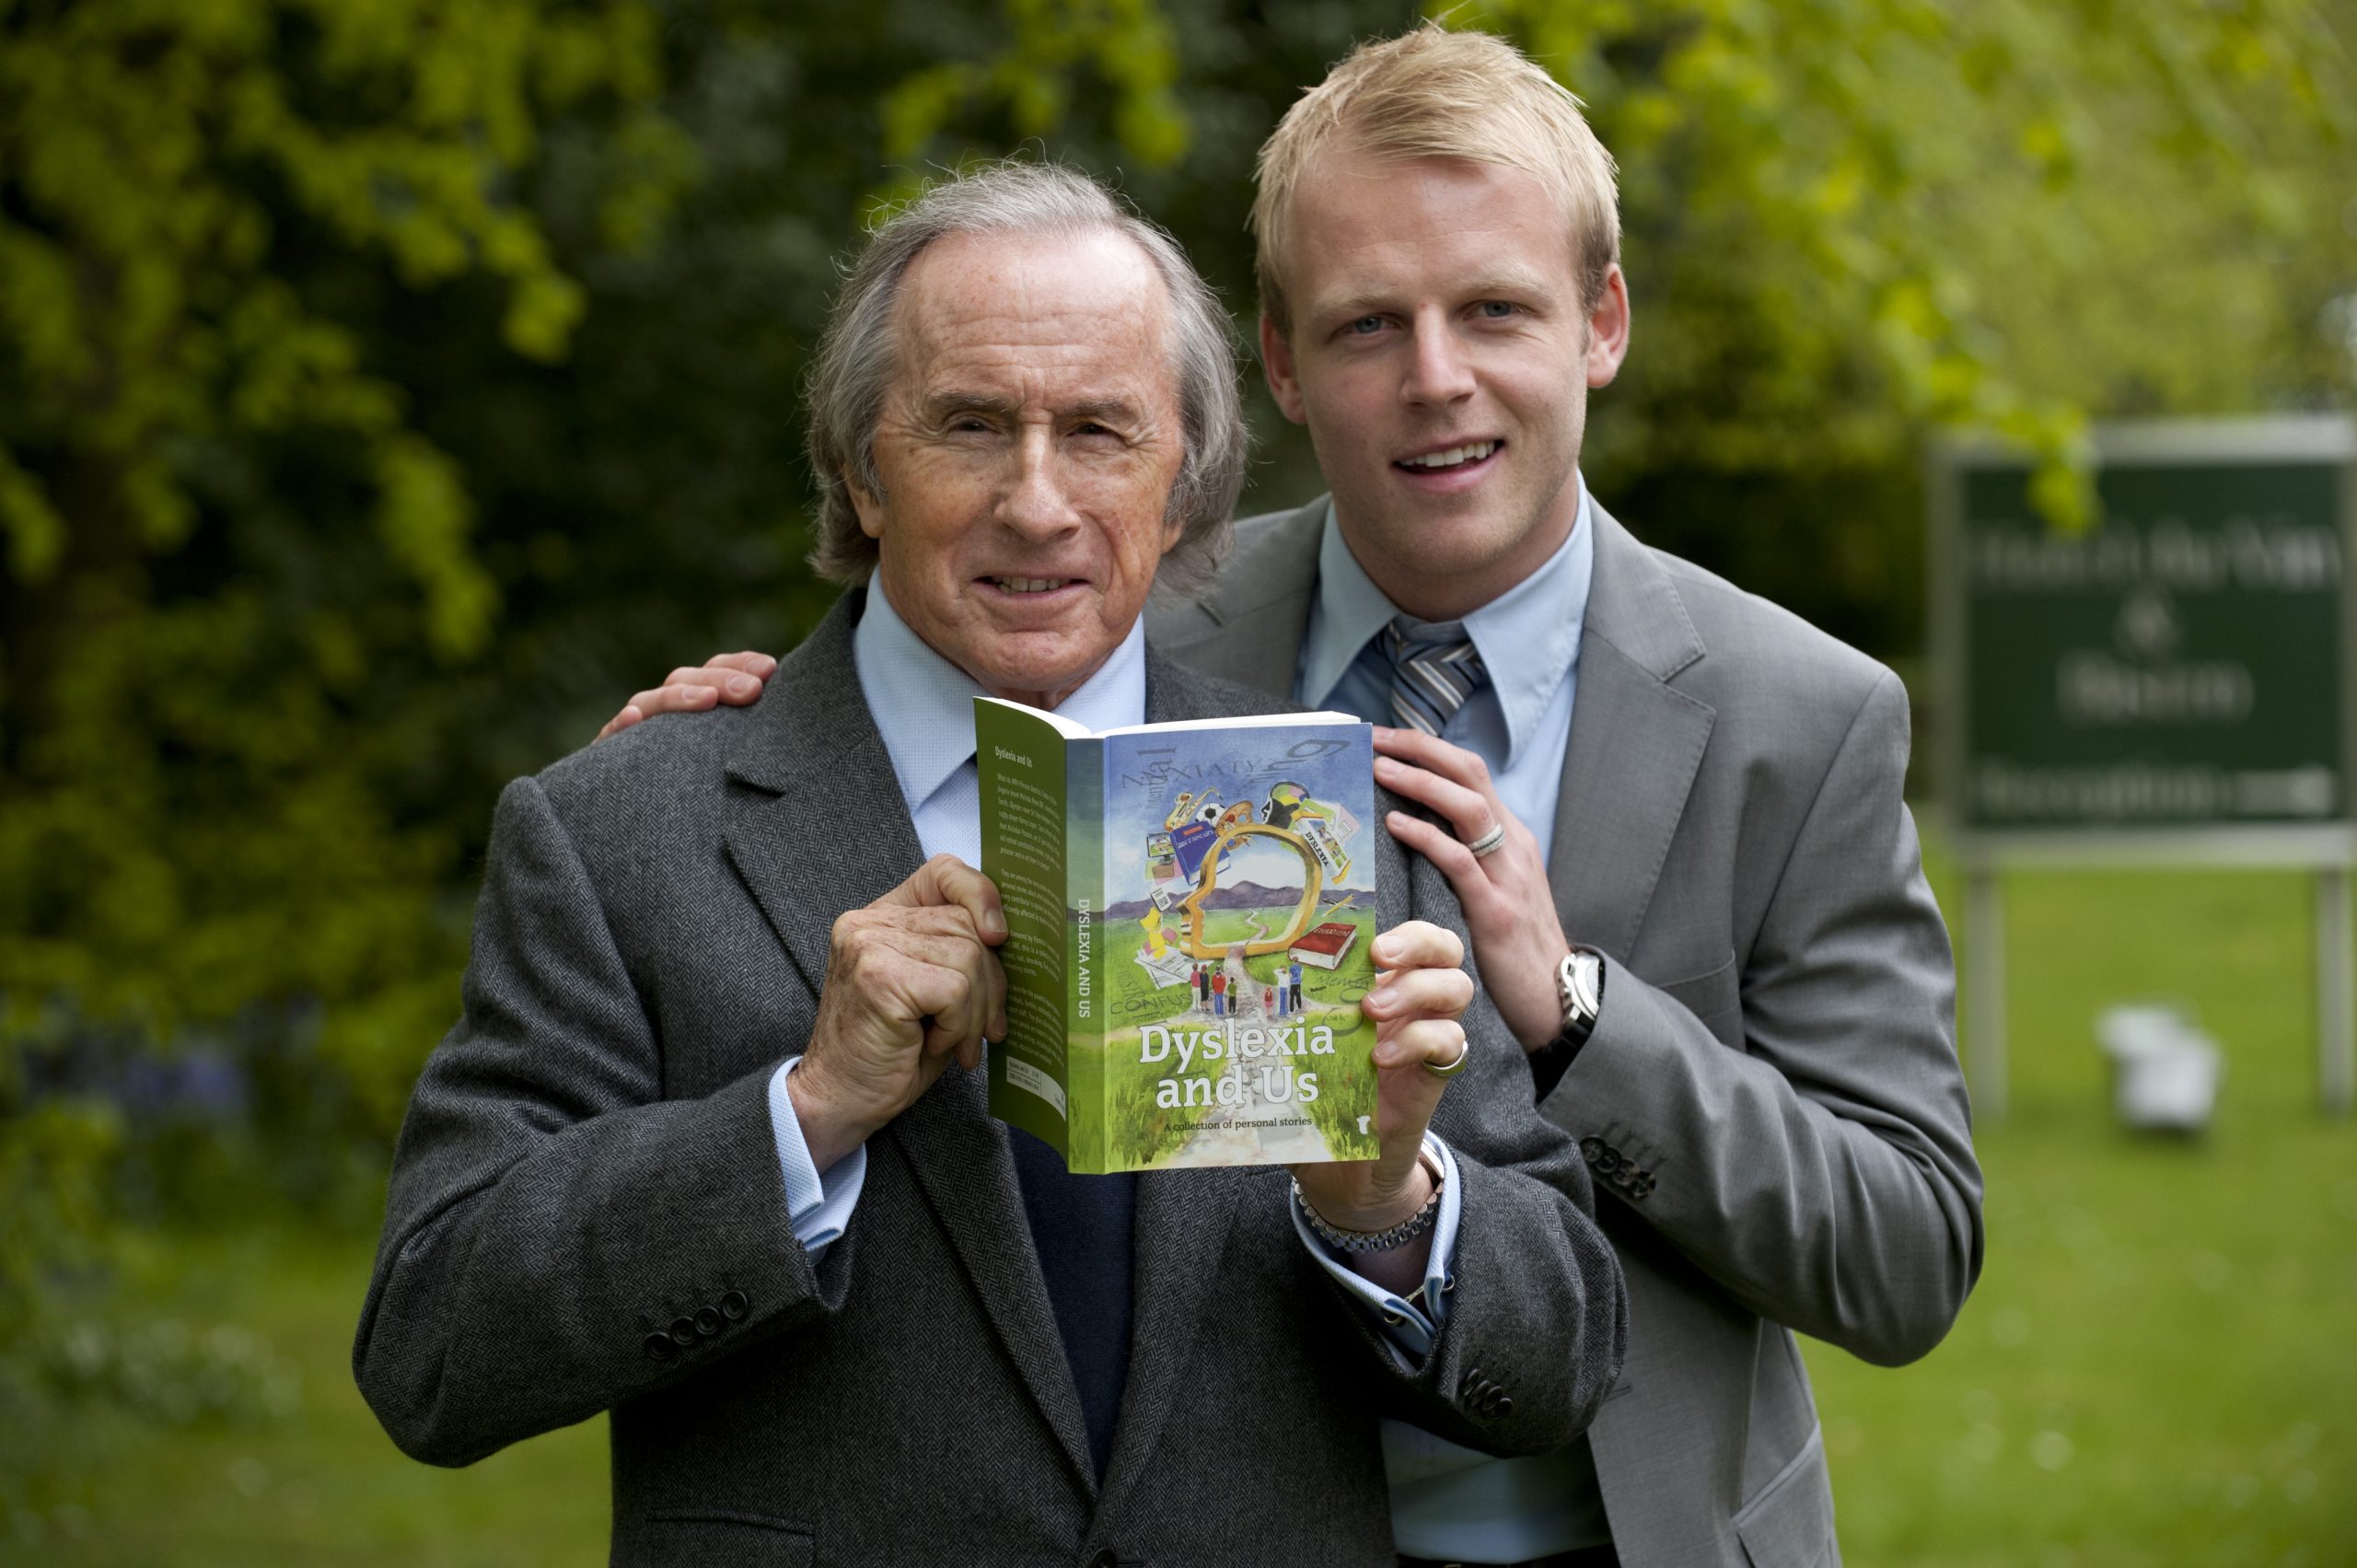 Celebritis Sir Jackie Stewart and Steven Naismith hold a copy of Dysleixa and Us between them; Steven's arm is placed around Jackie's shoulder and they both smile.